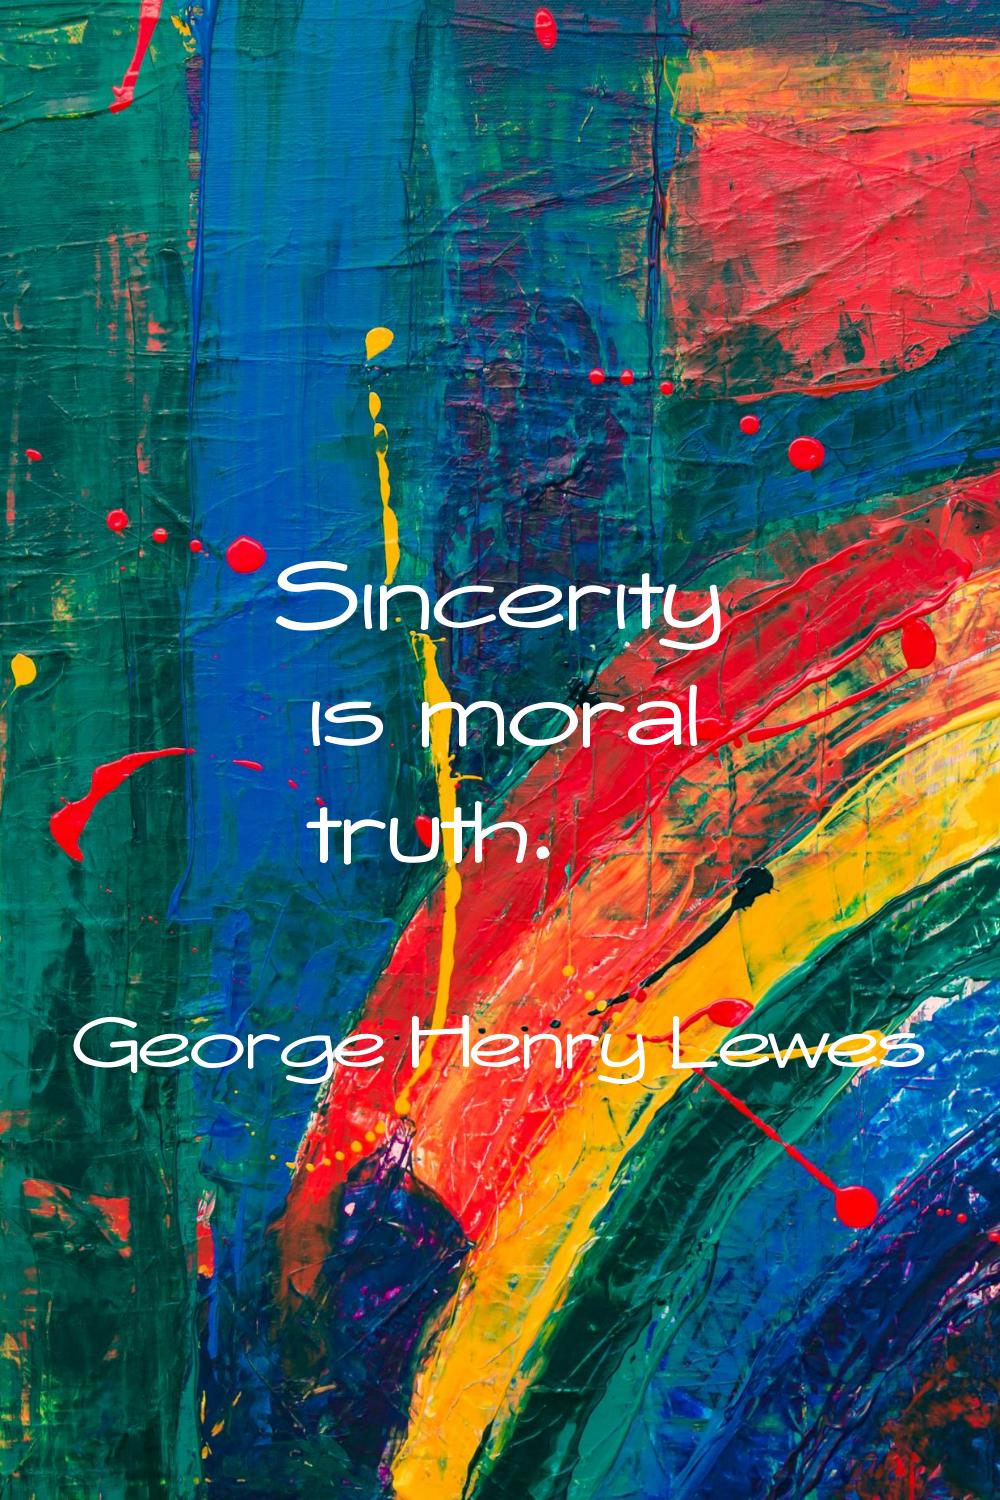 Sincerity is moral truth.